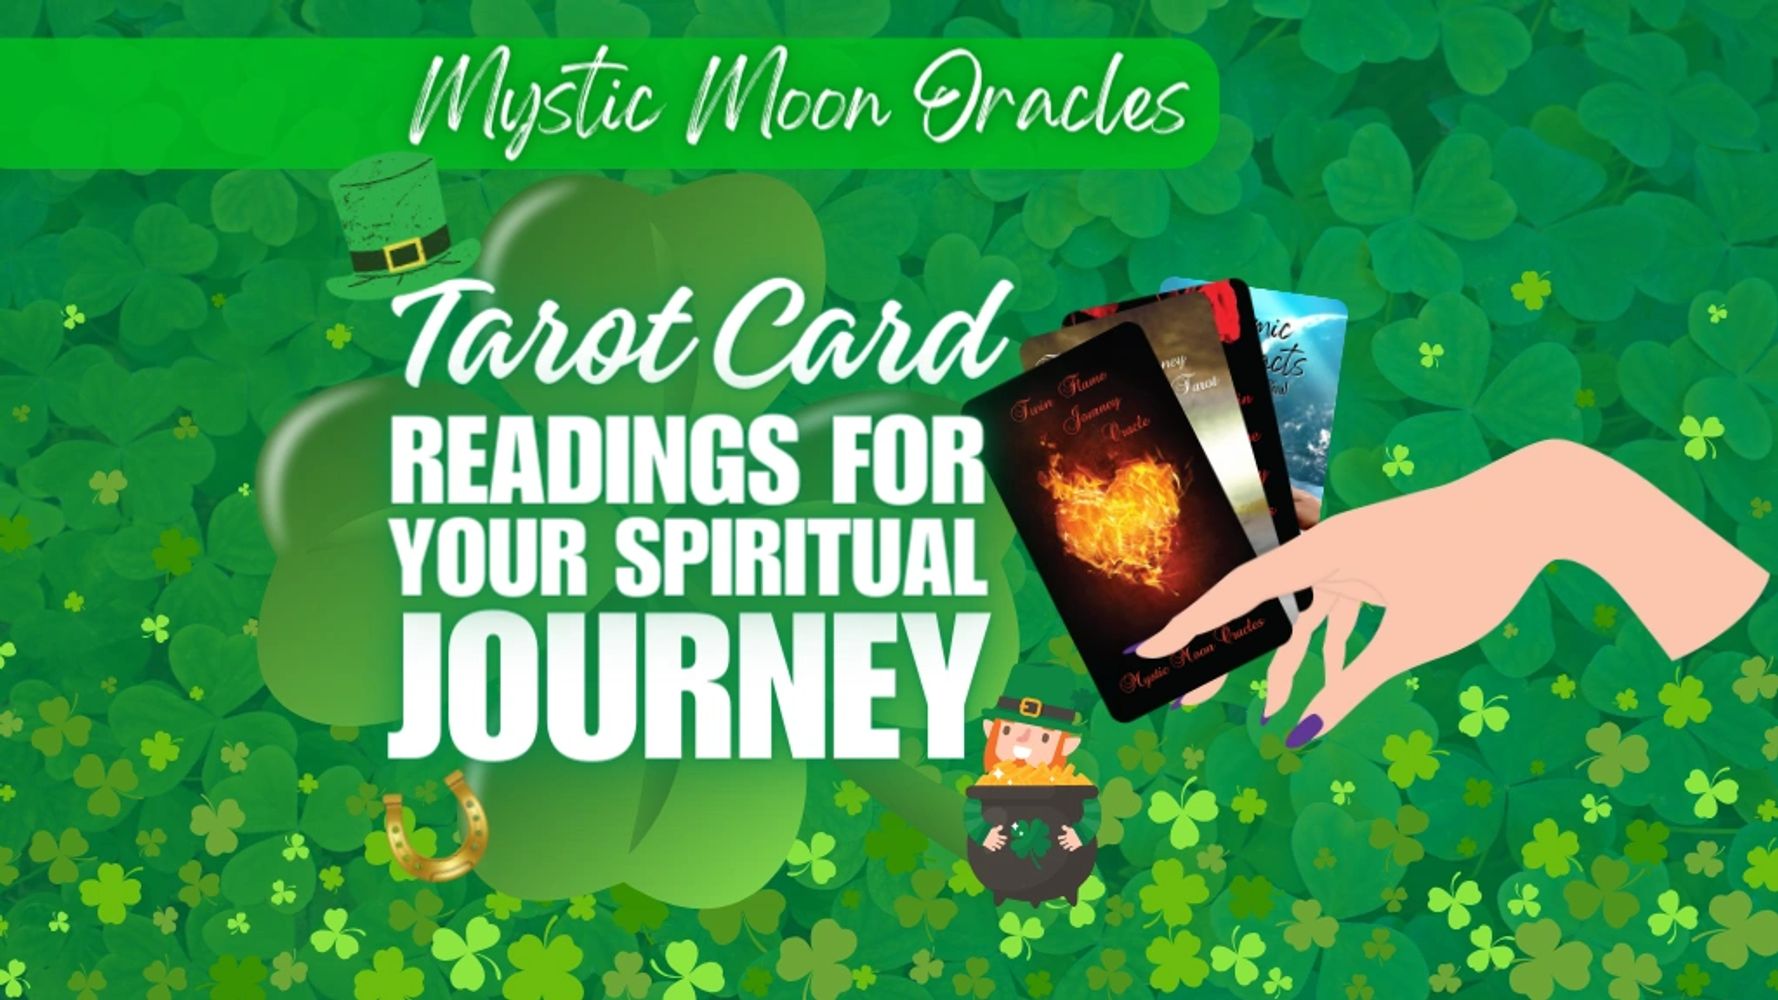 Mystic Moon Oracles Website, Tarot Card Reader since 1997. Spiritual, General & Twin Flame Readings.